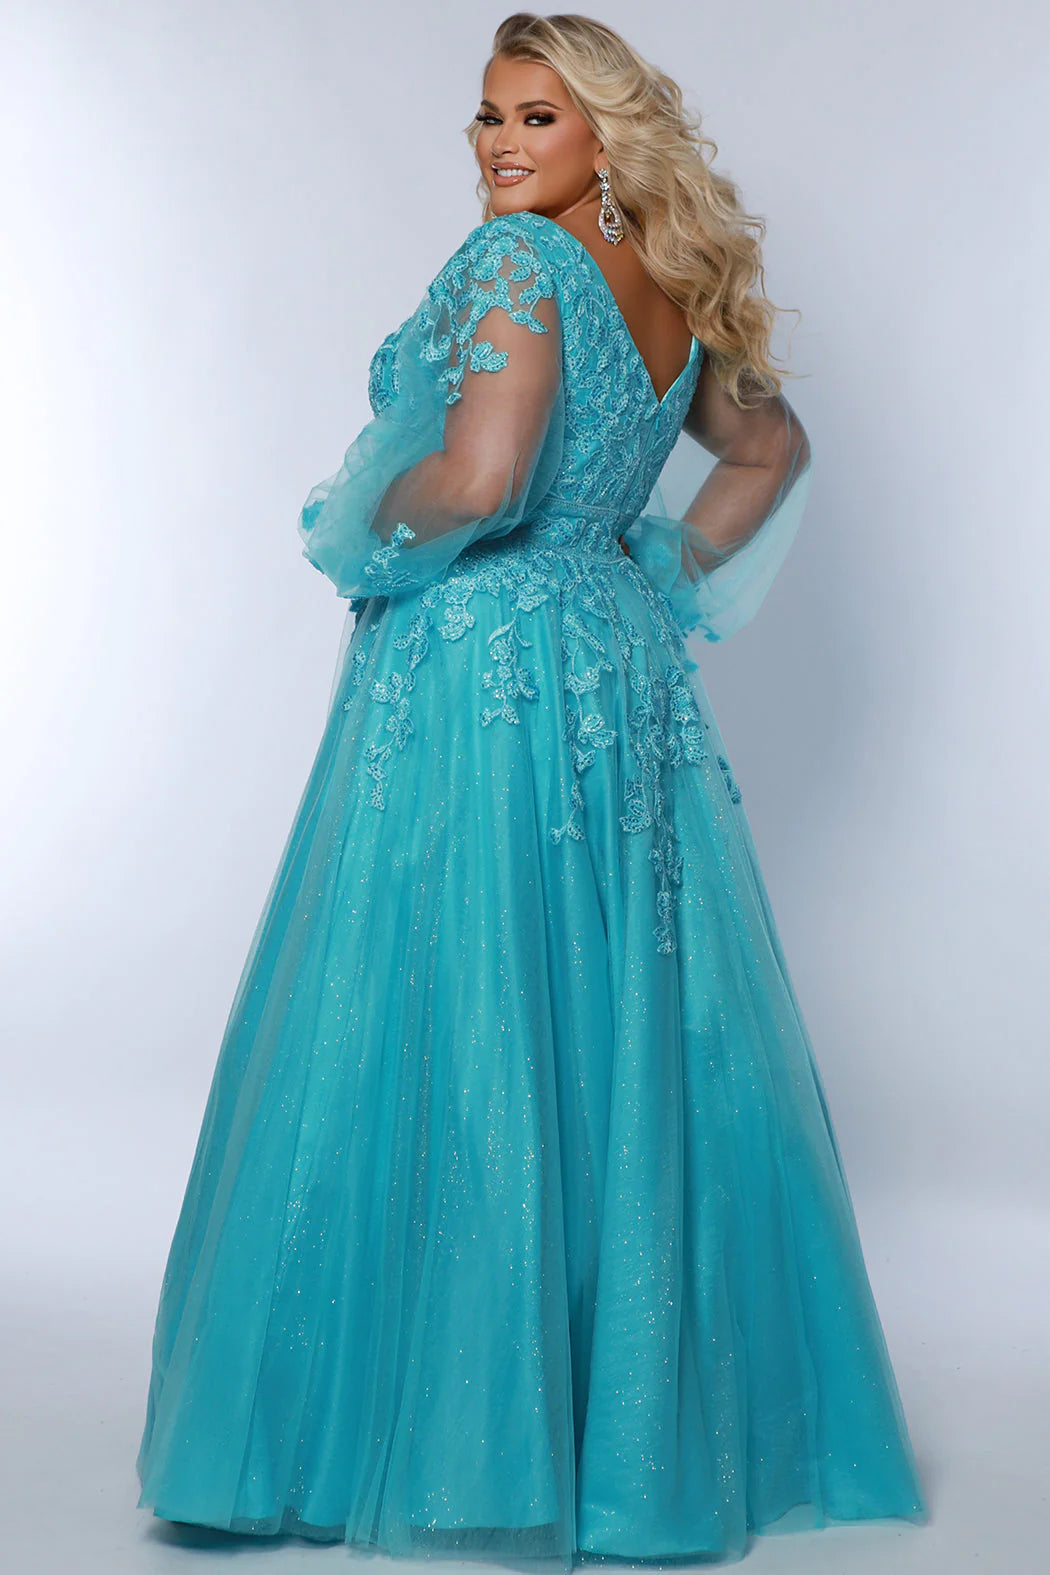 Turn heads in Sydneys Closet SC7373 Long Prom Dress. The sequin and plus size puff sleeves make this A-Line formal gown remarkably elegant, while the plush material provides maximum comfort for your special night. Make a statement with this beautiful dress. You will look pretty fancy at Prom 2024 or any special event when you opt to wear this plus size formal dress with sleeves.